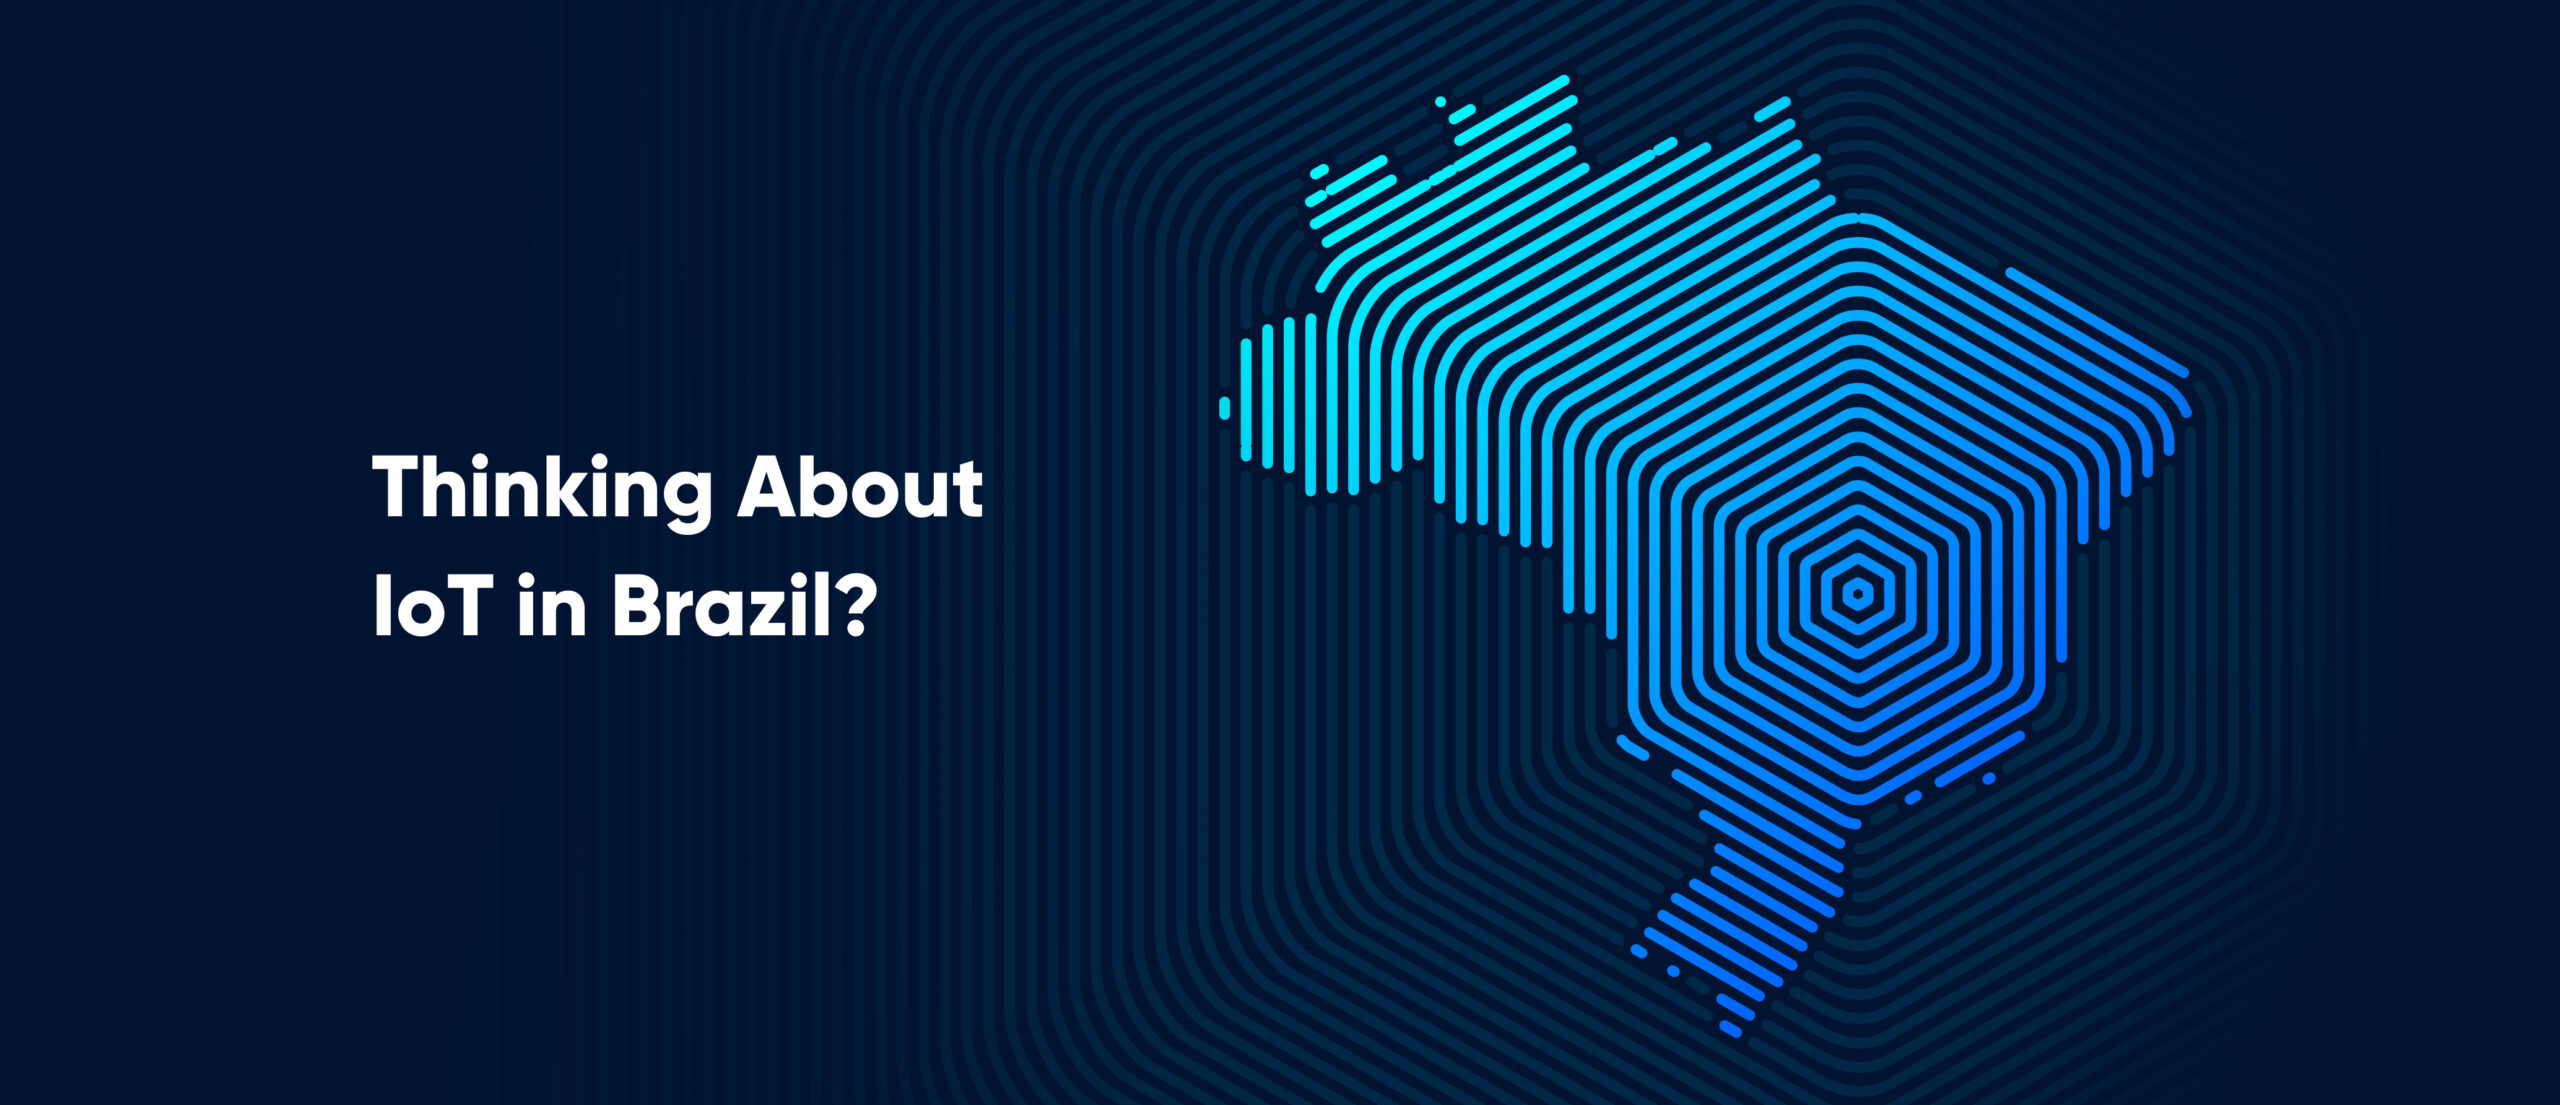 flolive's guide to getting iot connectivity coverage in Brazil with NLT